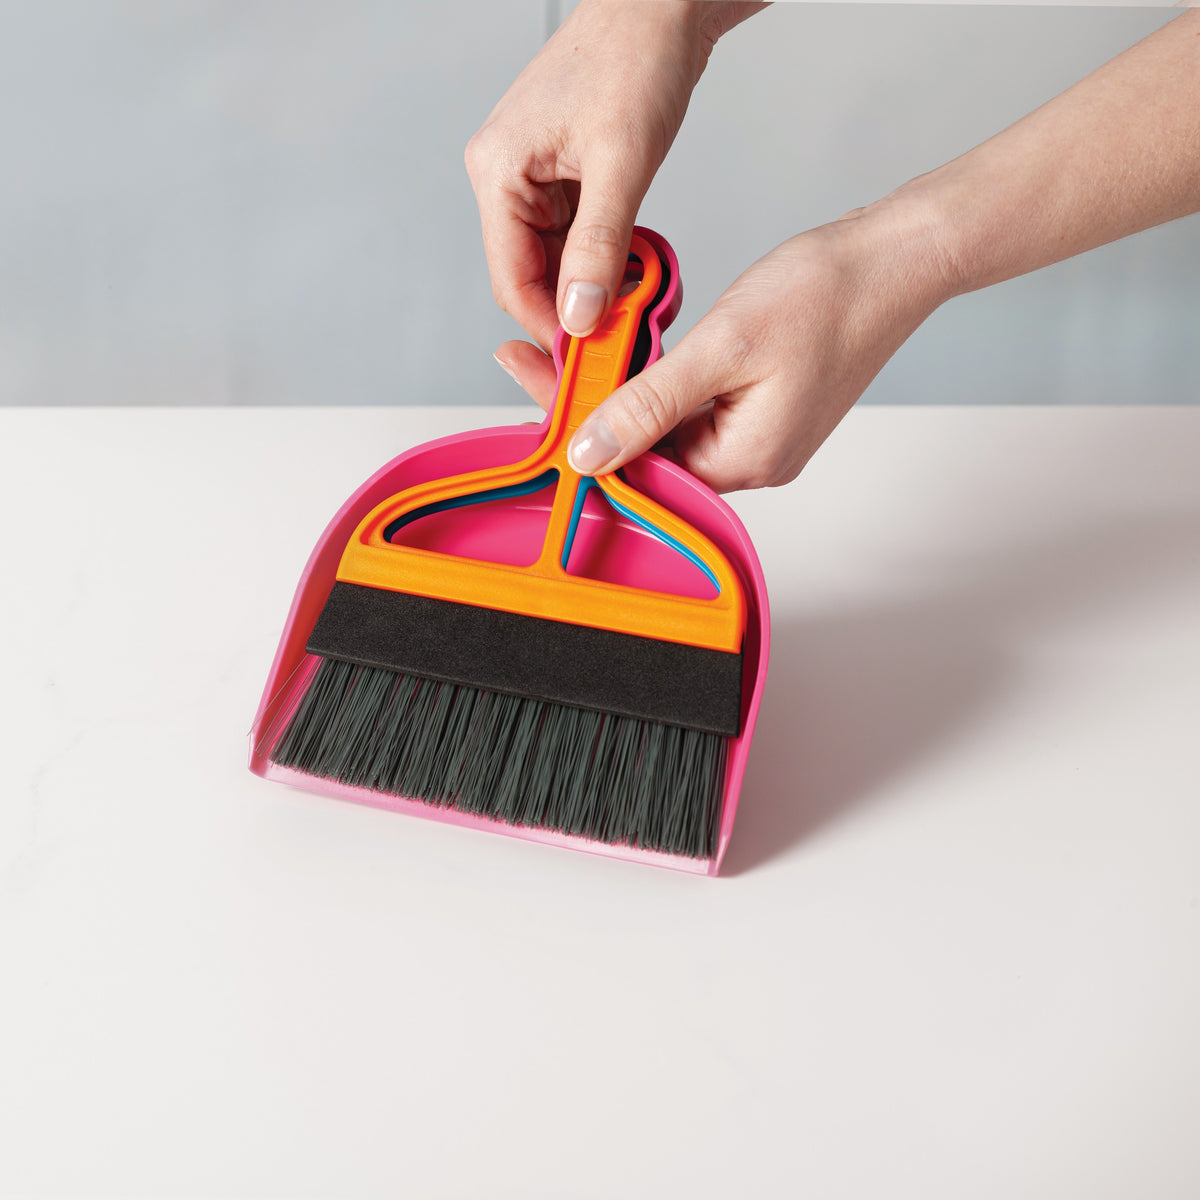 Mini Dustpan, Brush and Squeegee Set